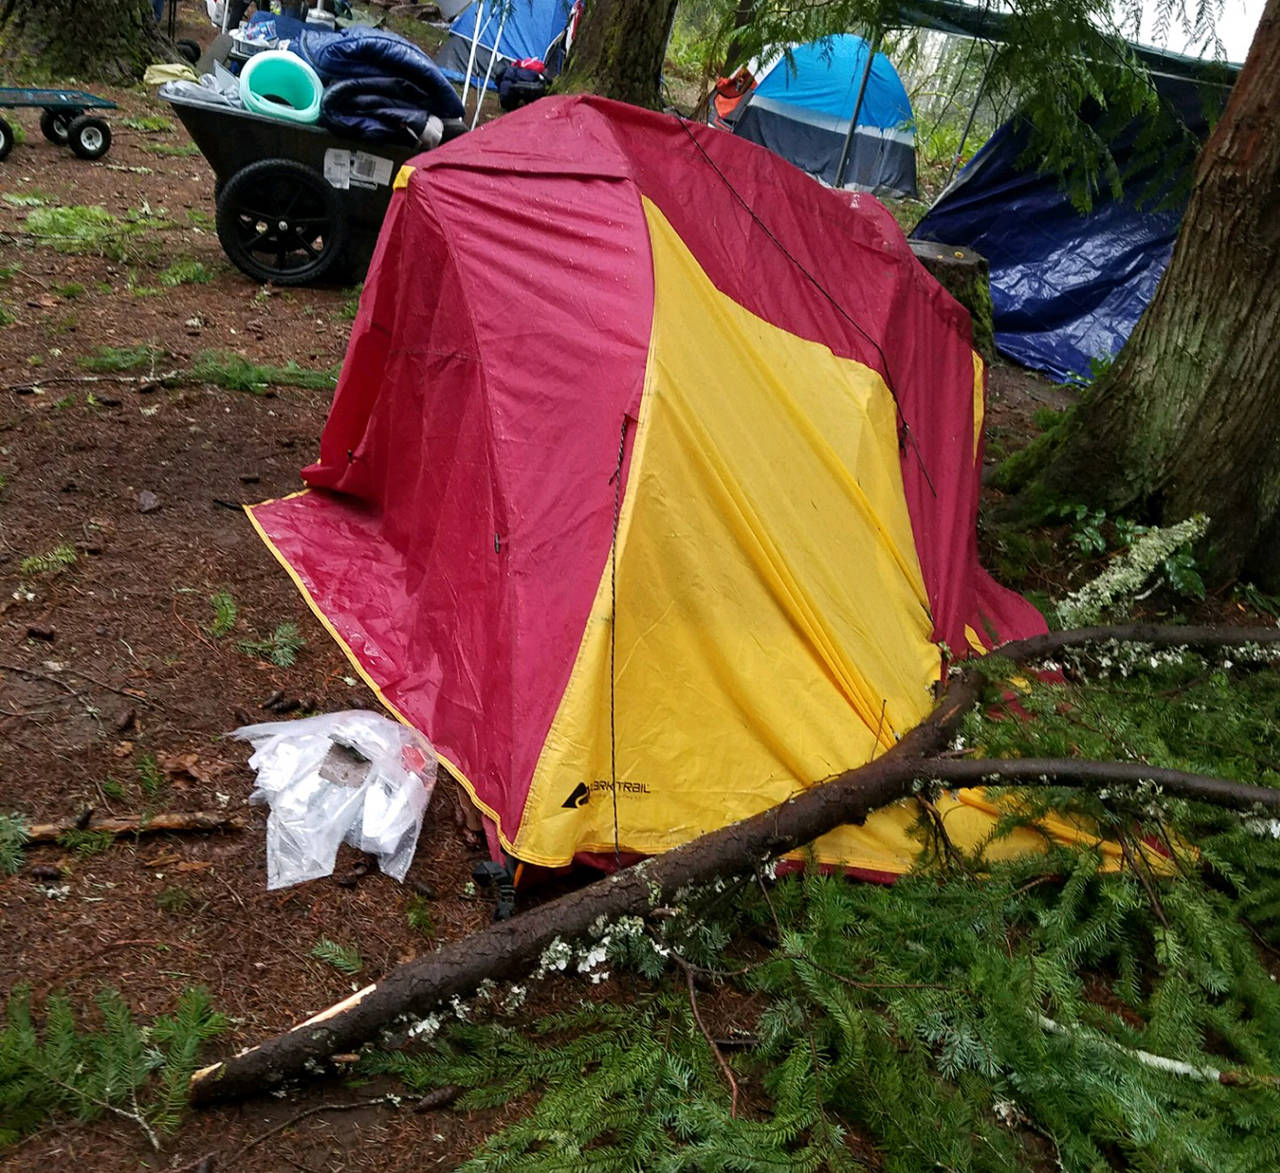 (Photo courtesy Rebecca Ledford) This fallen branch impaled a scout’s tent right where his pillow was during Saturday’s windstorm at Camp Thunderbird.